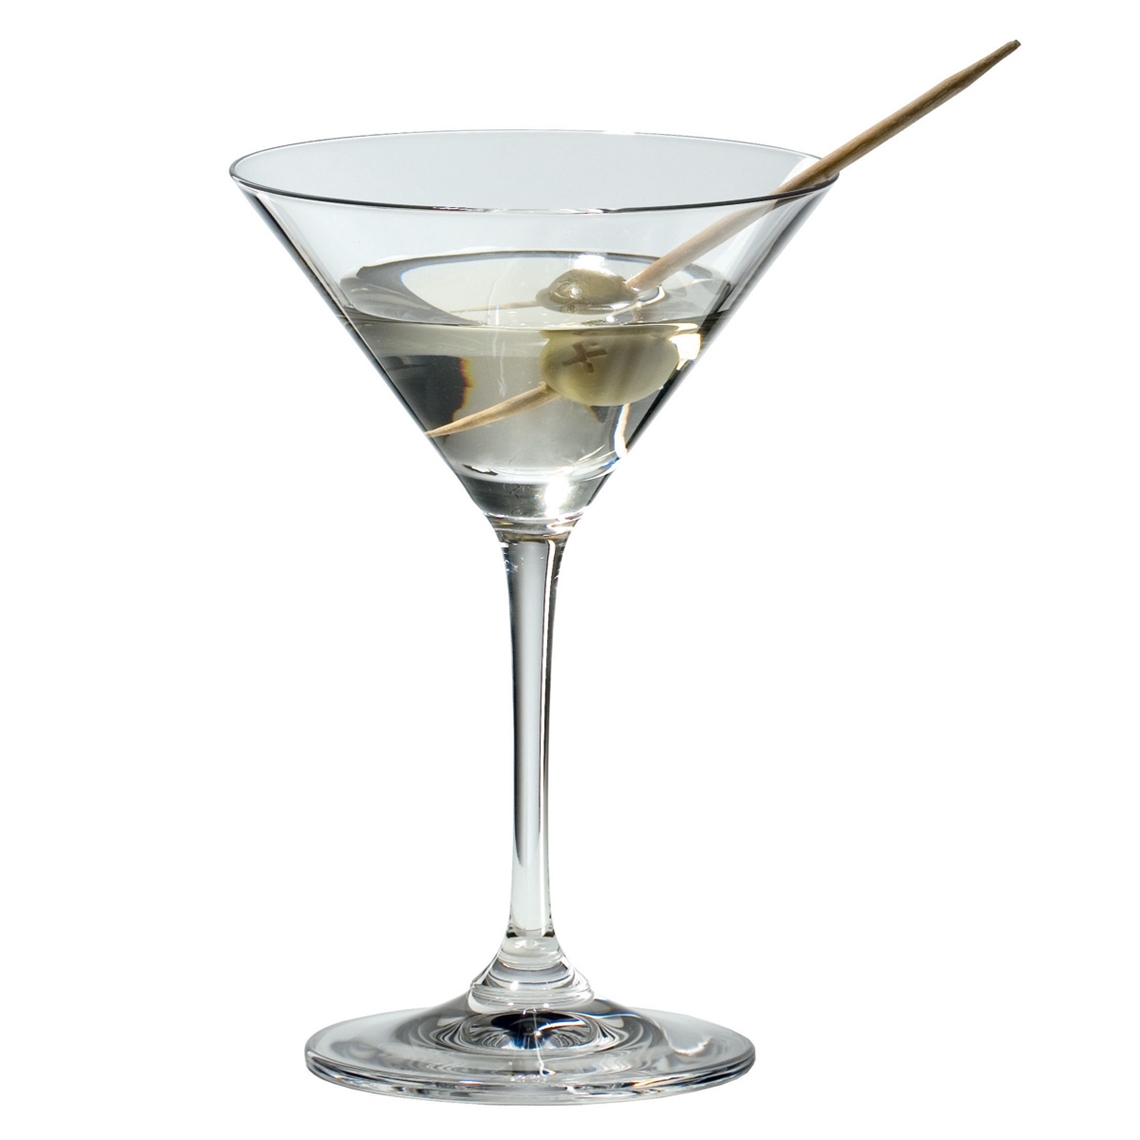 View more whisky glasses from our Martini Glasses range